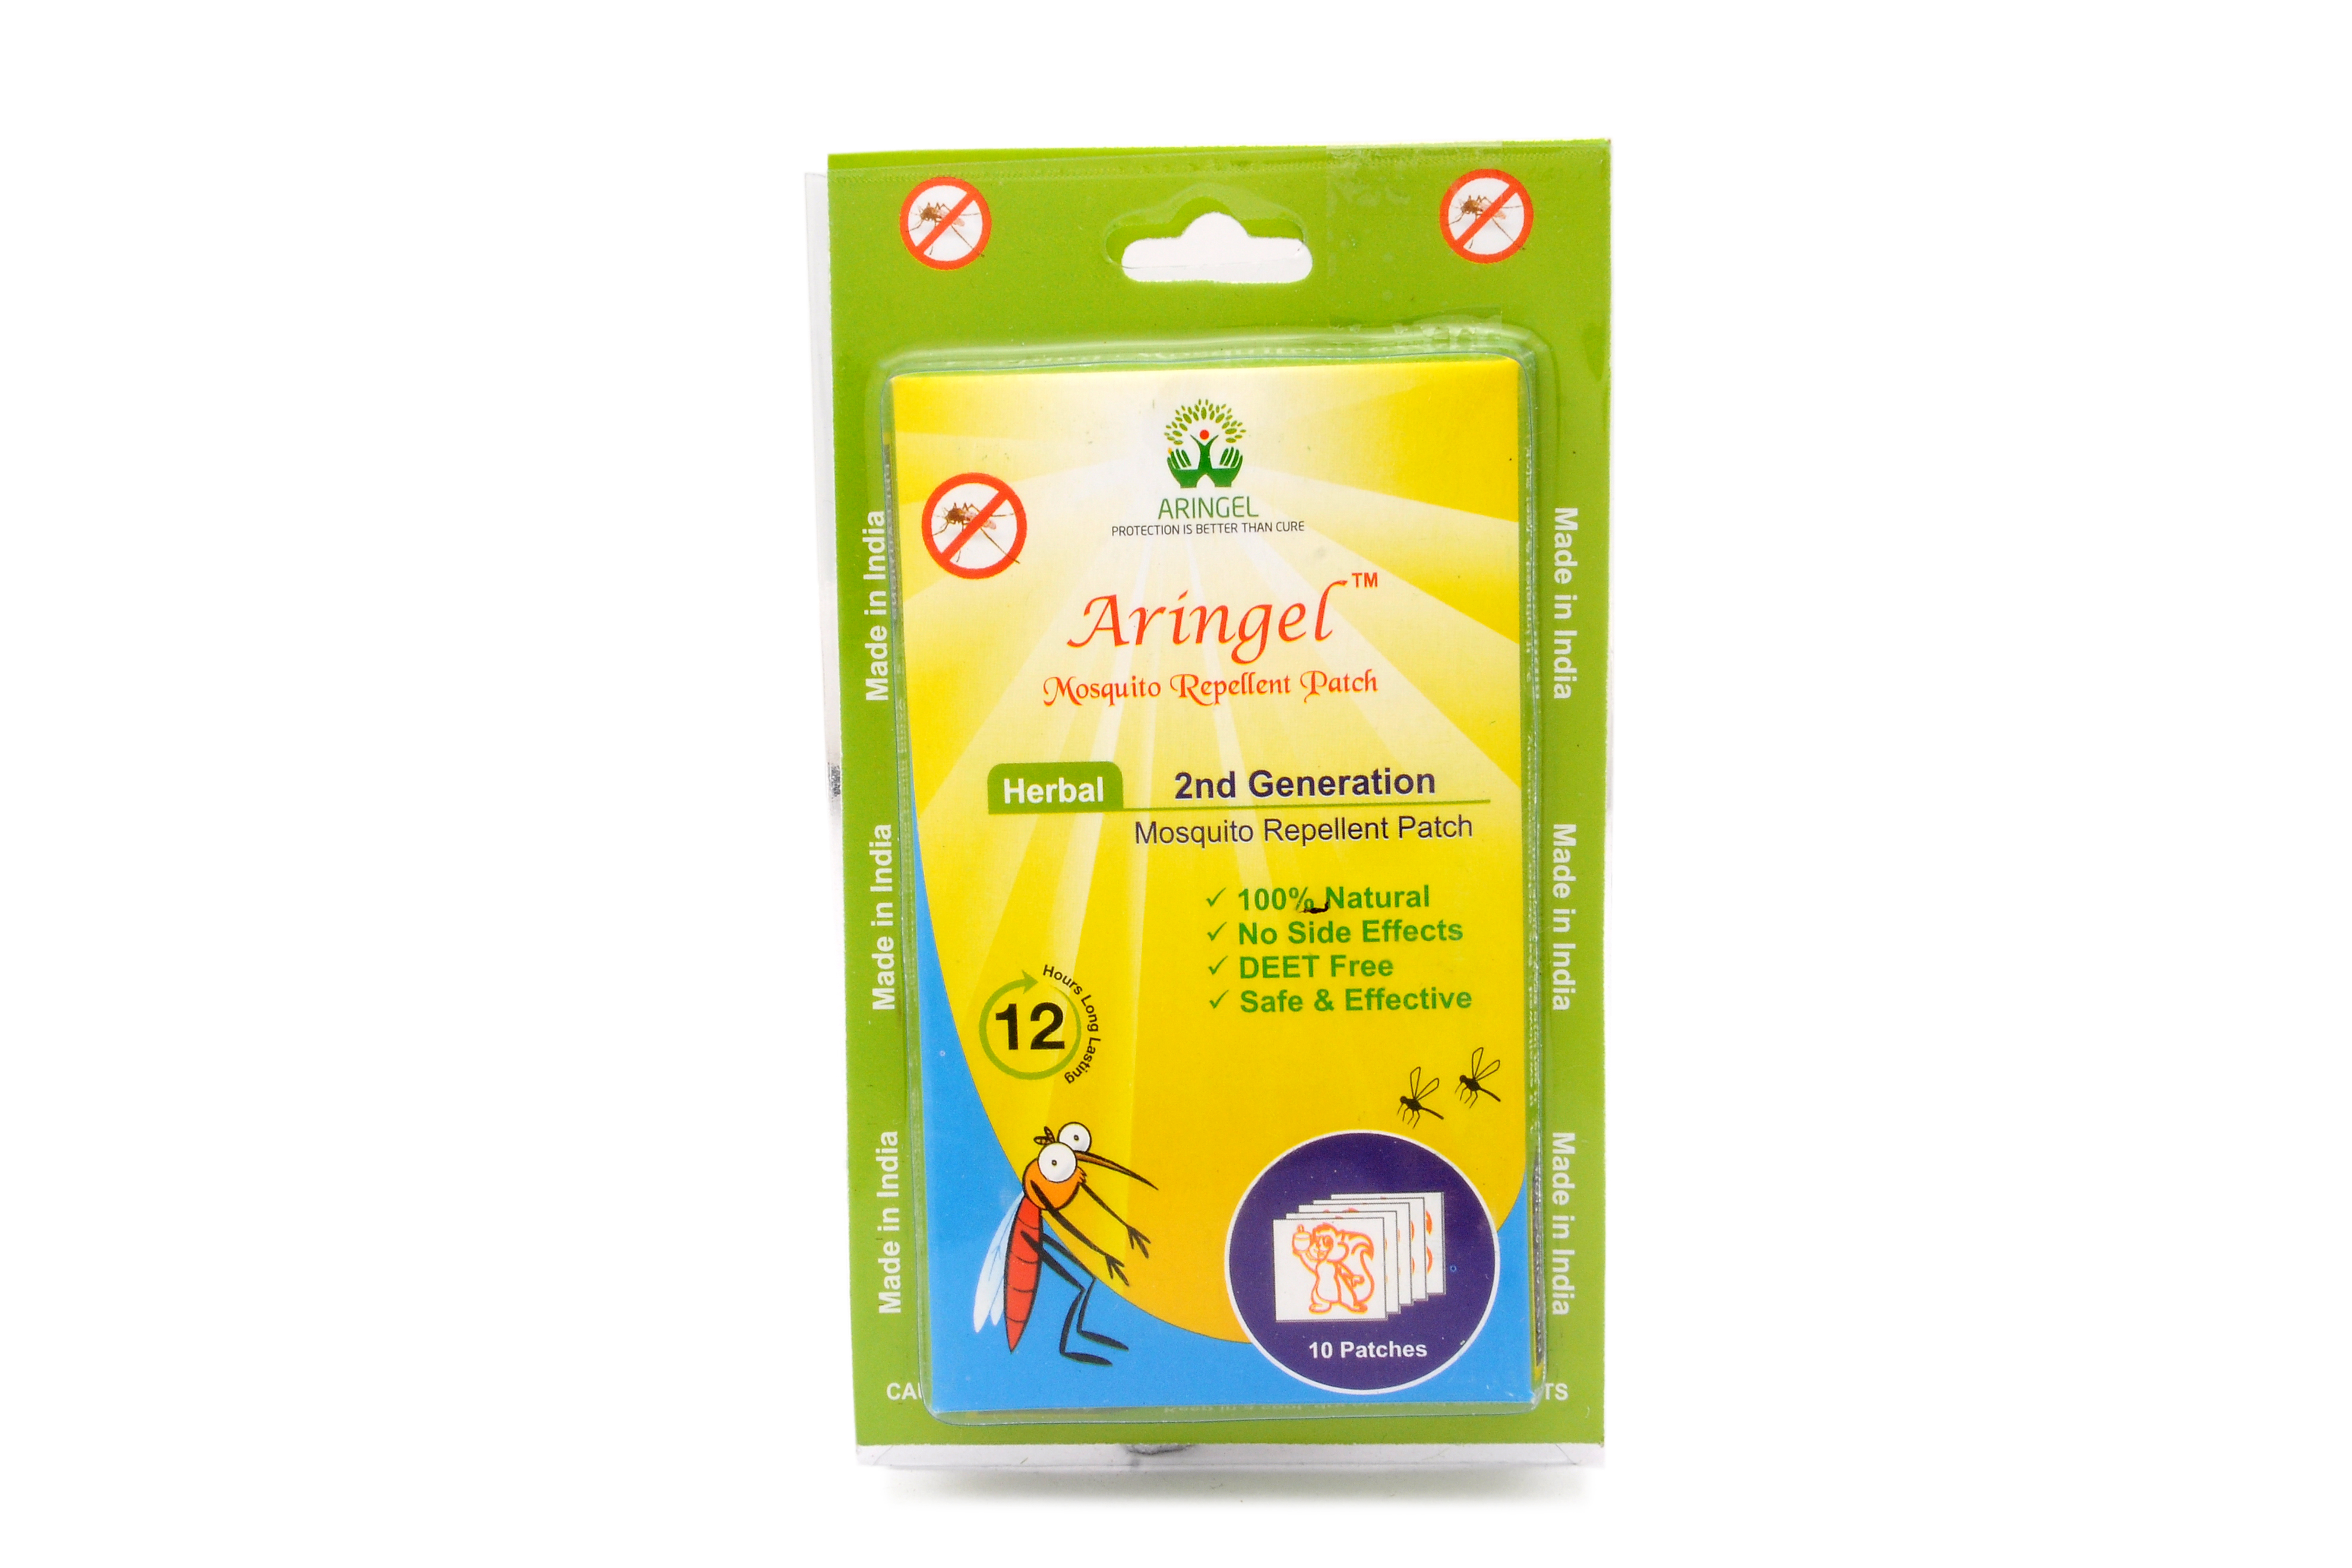 Wanted-Super Stockist and Distributors for Mosquito Repellant